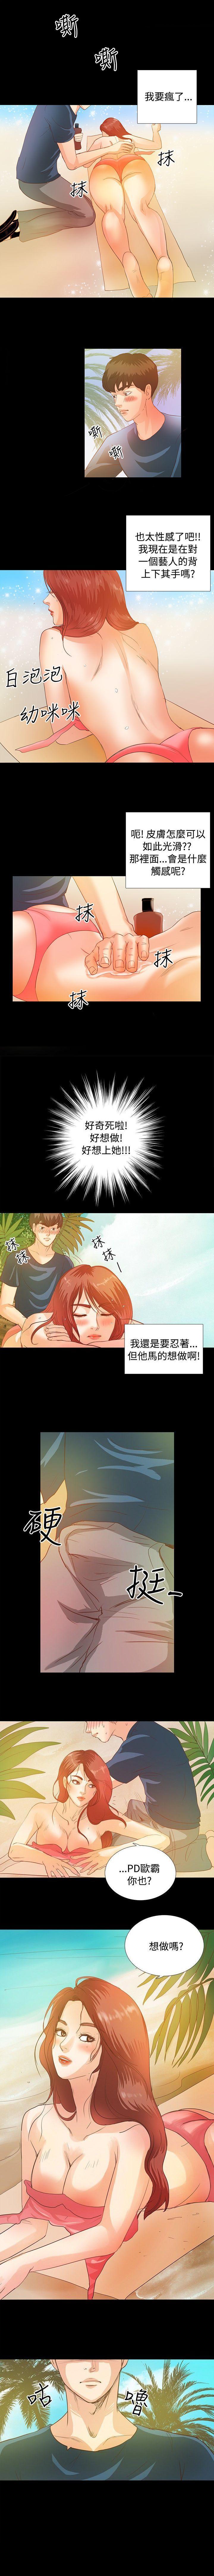 Amateur Porn Free 叢林愛愛法則 1-49 And - Page 7